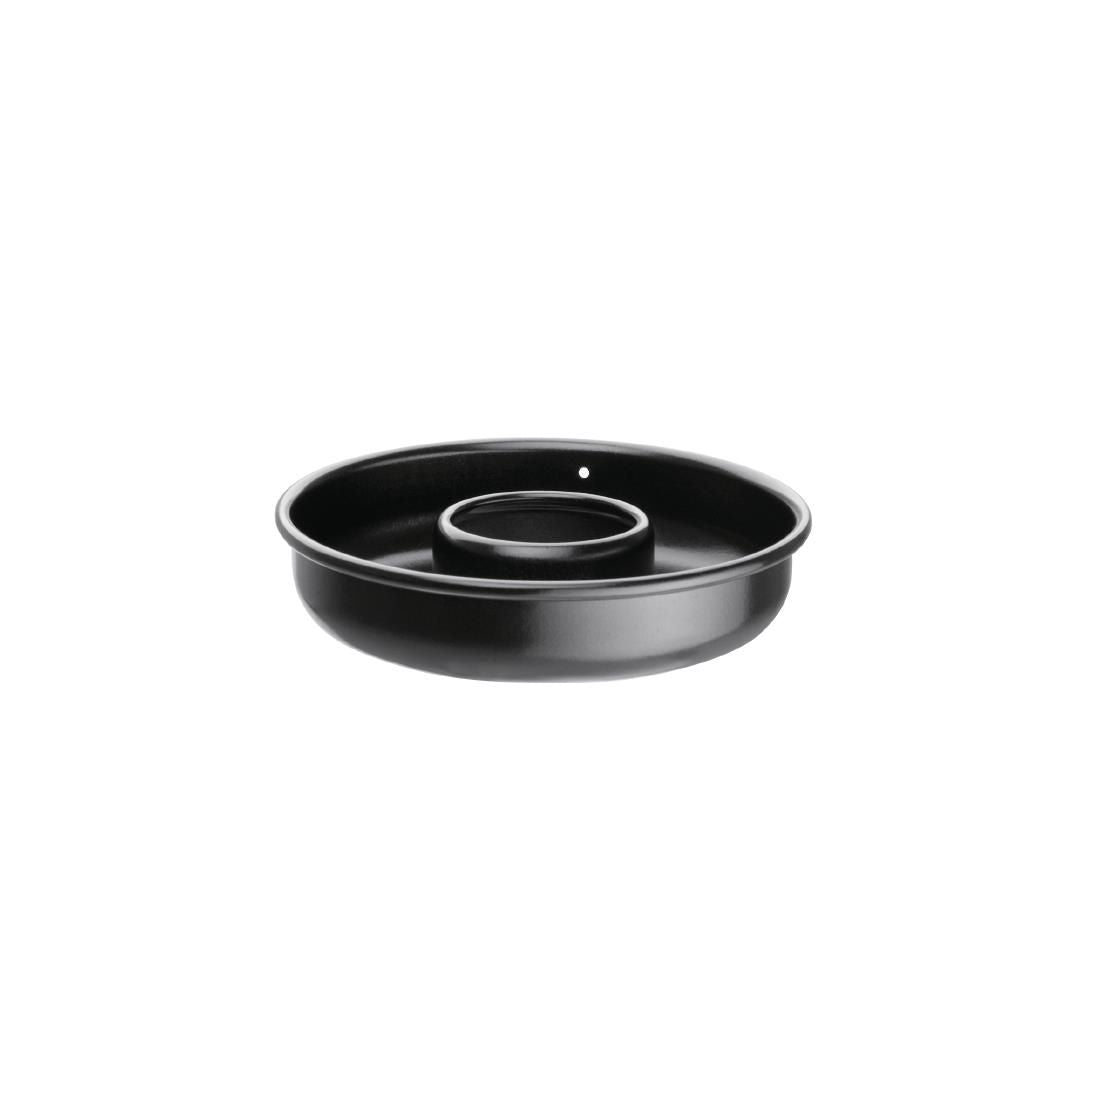 GC980 Vogue Non-Stick Savarin Moulds 86mm (Pack of 3) JD Catering Equipment Solutions Ltd